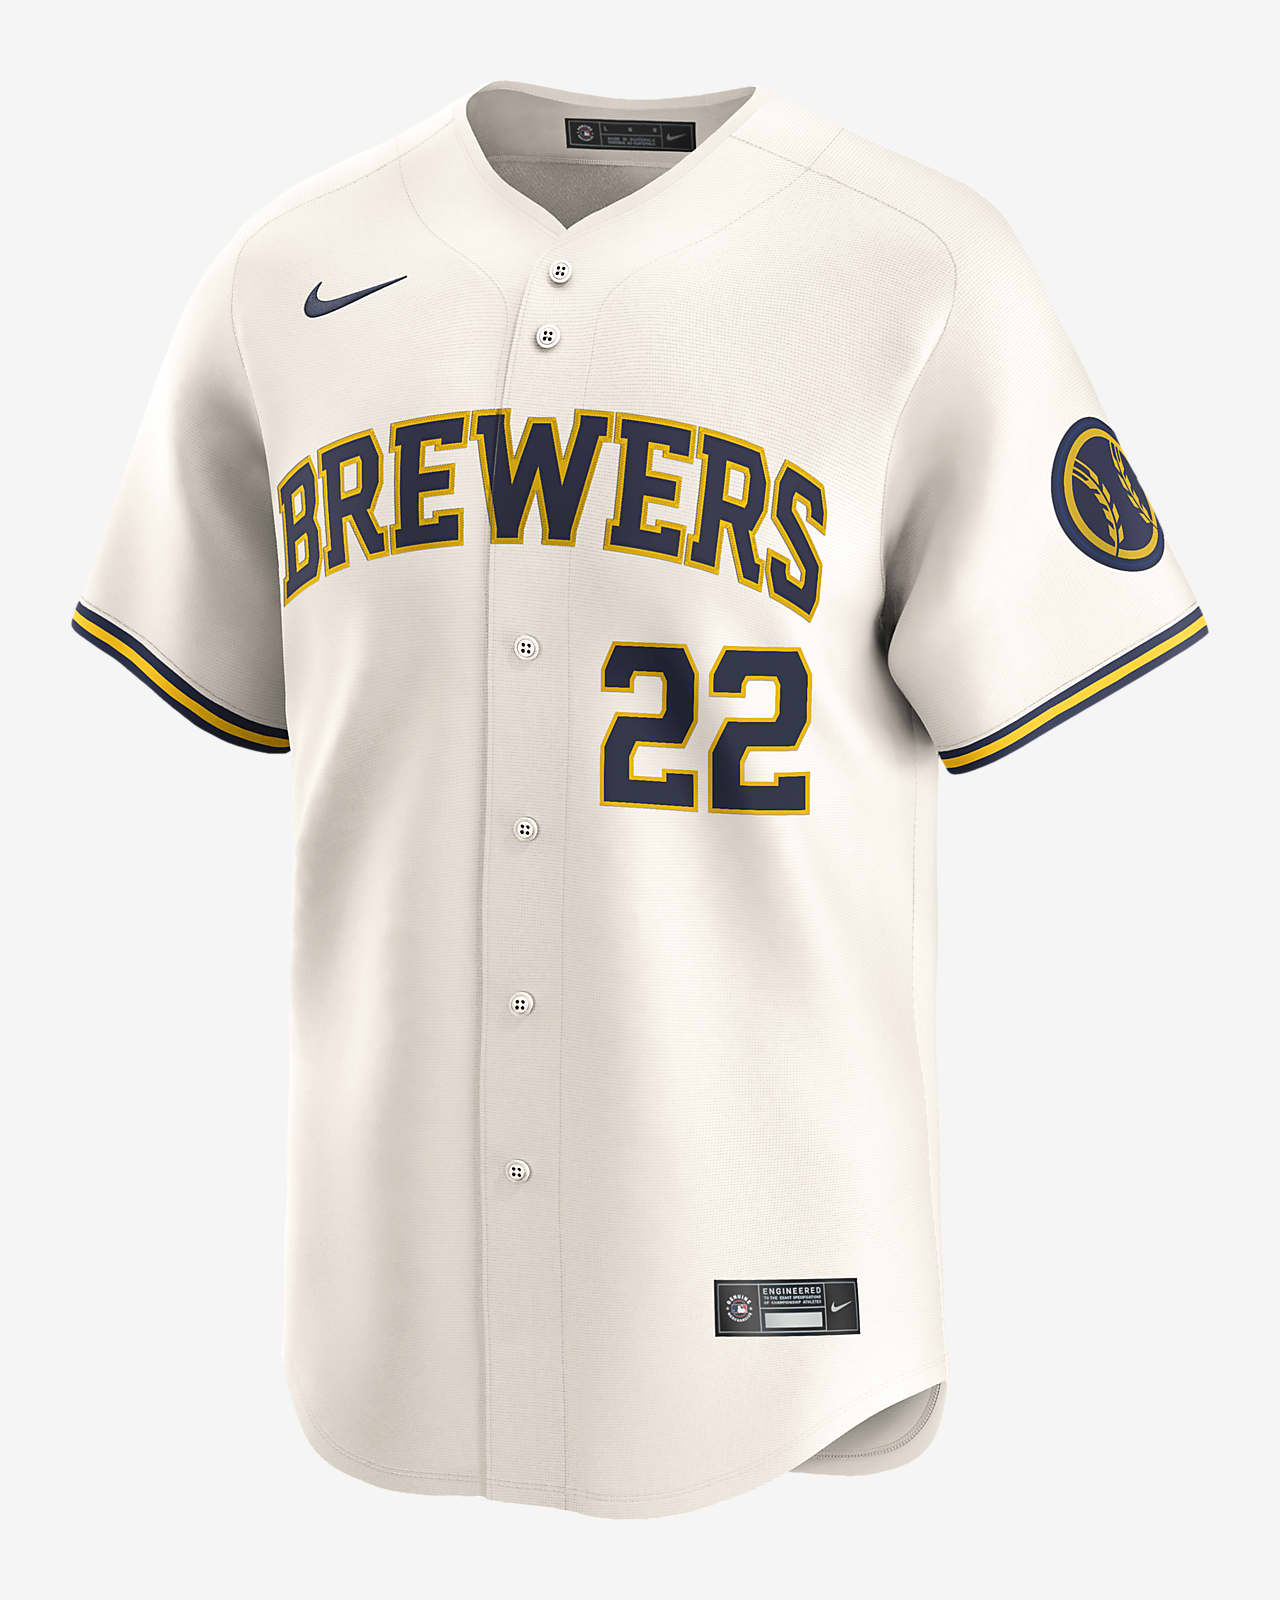 Christian Yelich Milwaukee Brewers Men's Nike Dri-FIT ADV MLB Limited Jersey